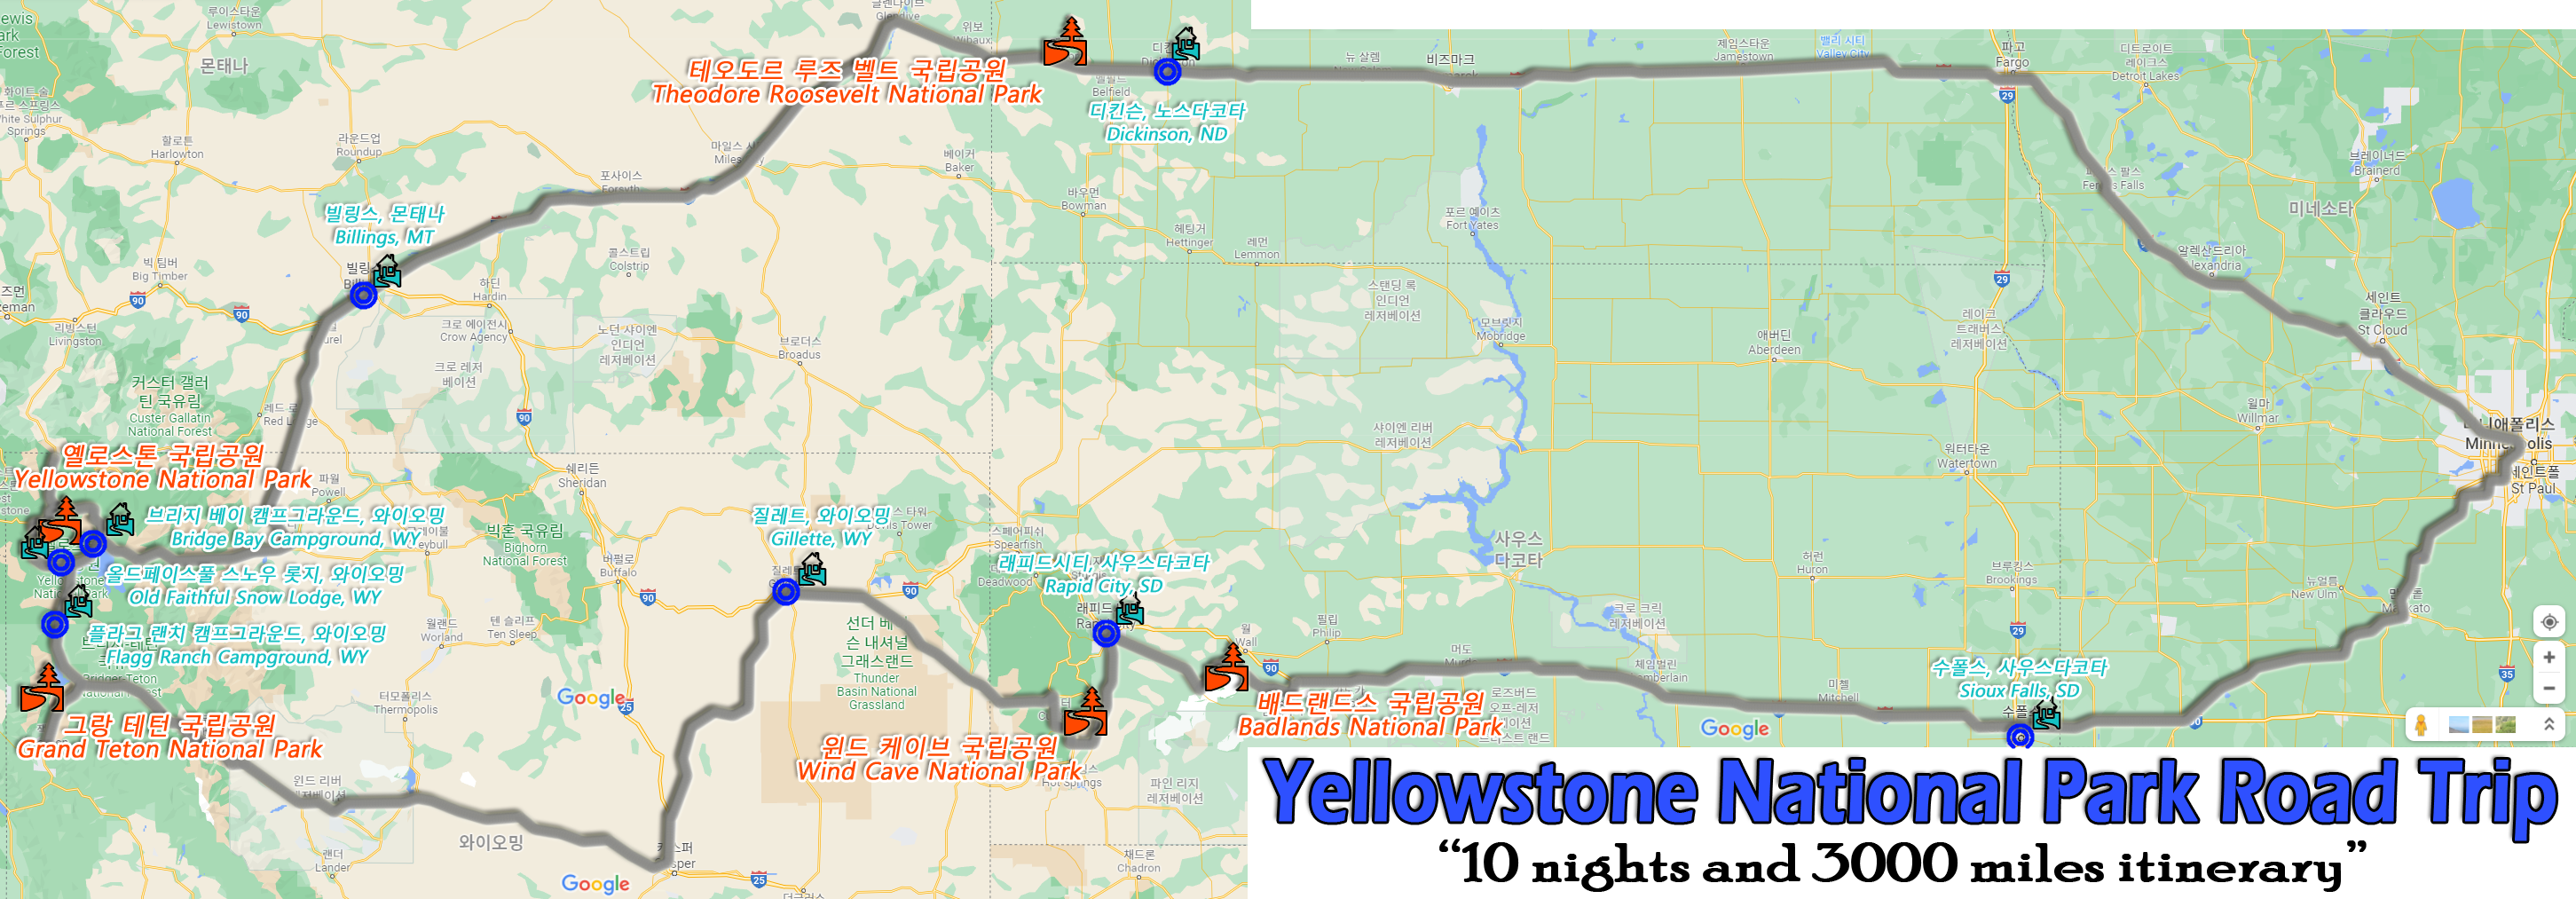 Yellowstone National Park Road Trip